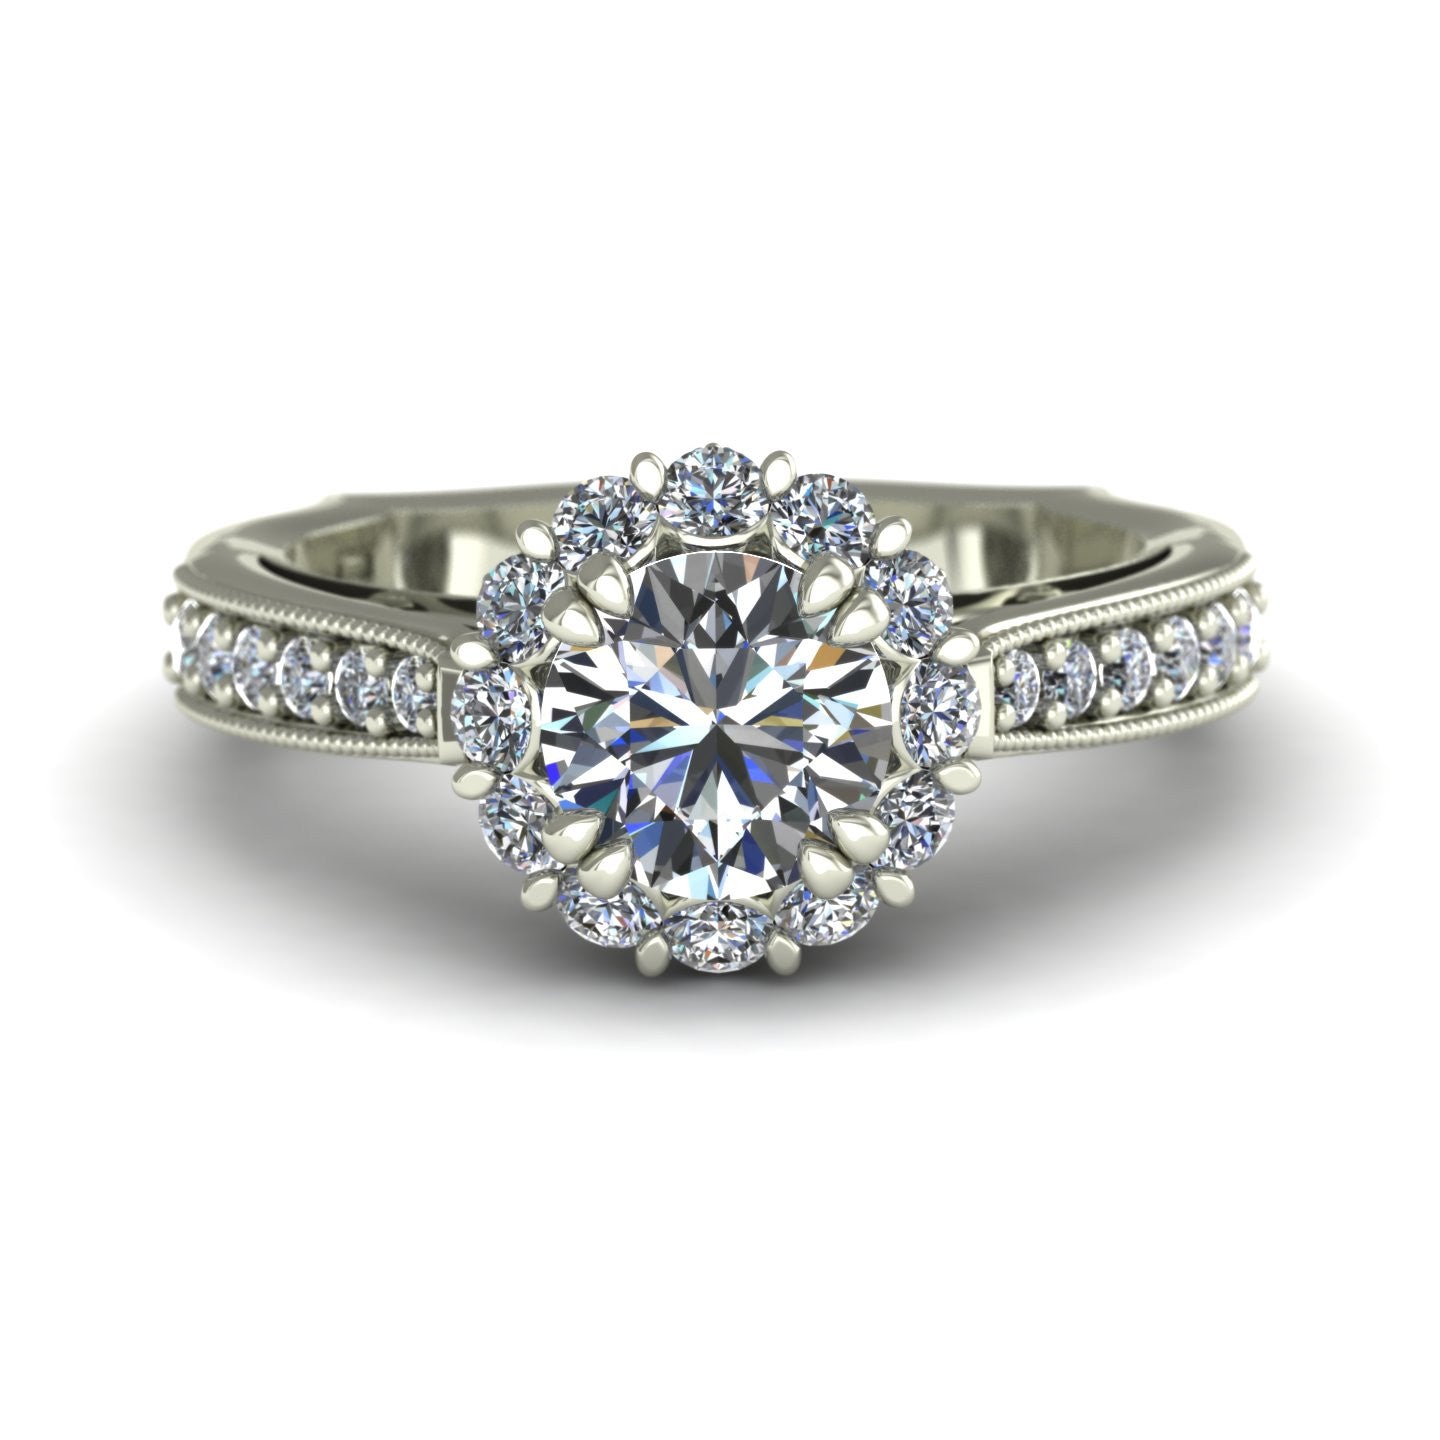 1 ct diamond posey flower halo engagement ring in 14k white gold - Charles Babb Designs - top view